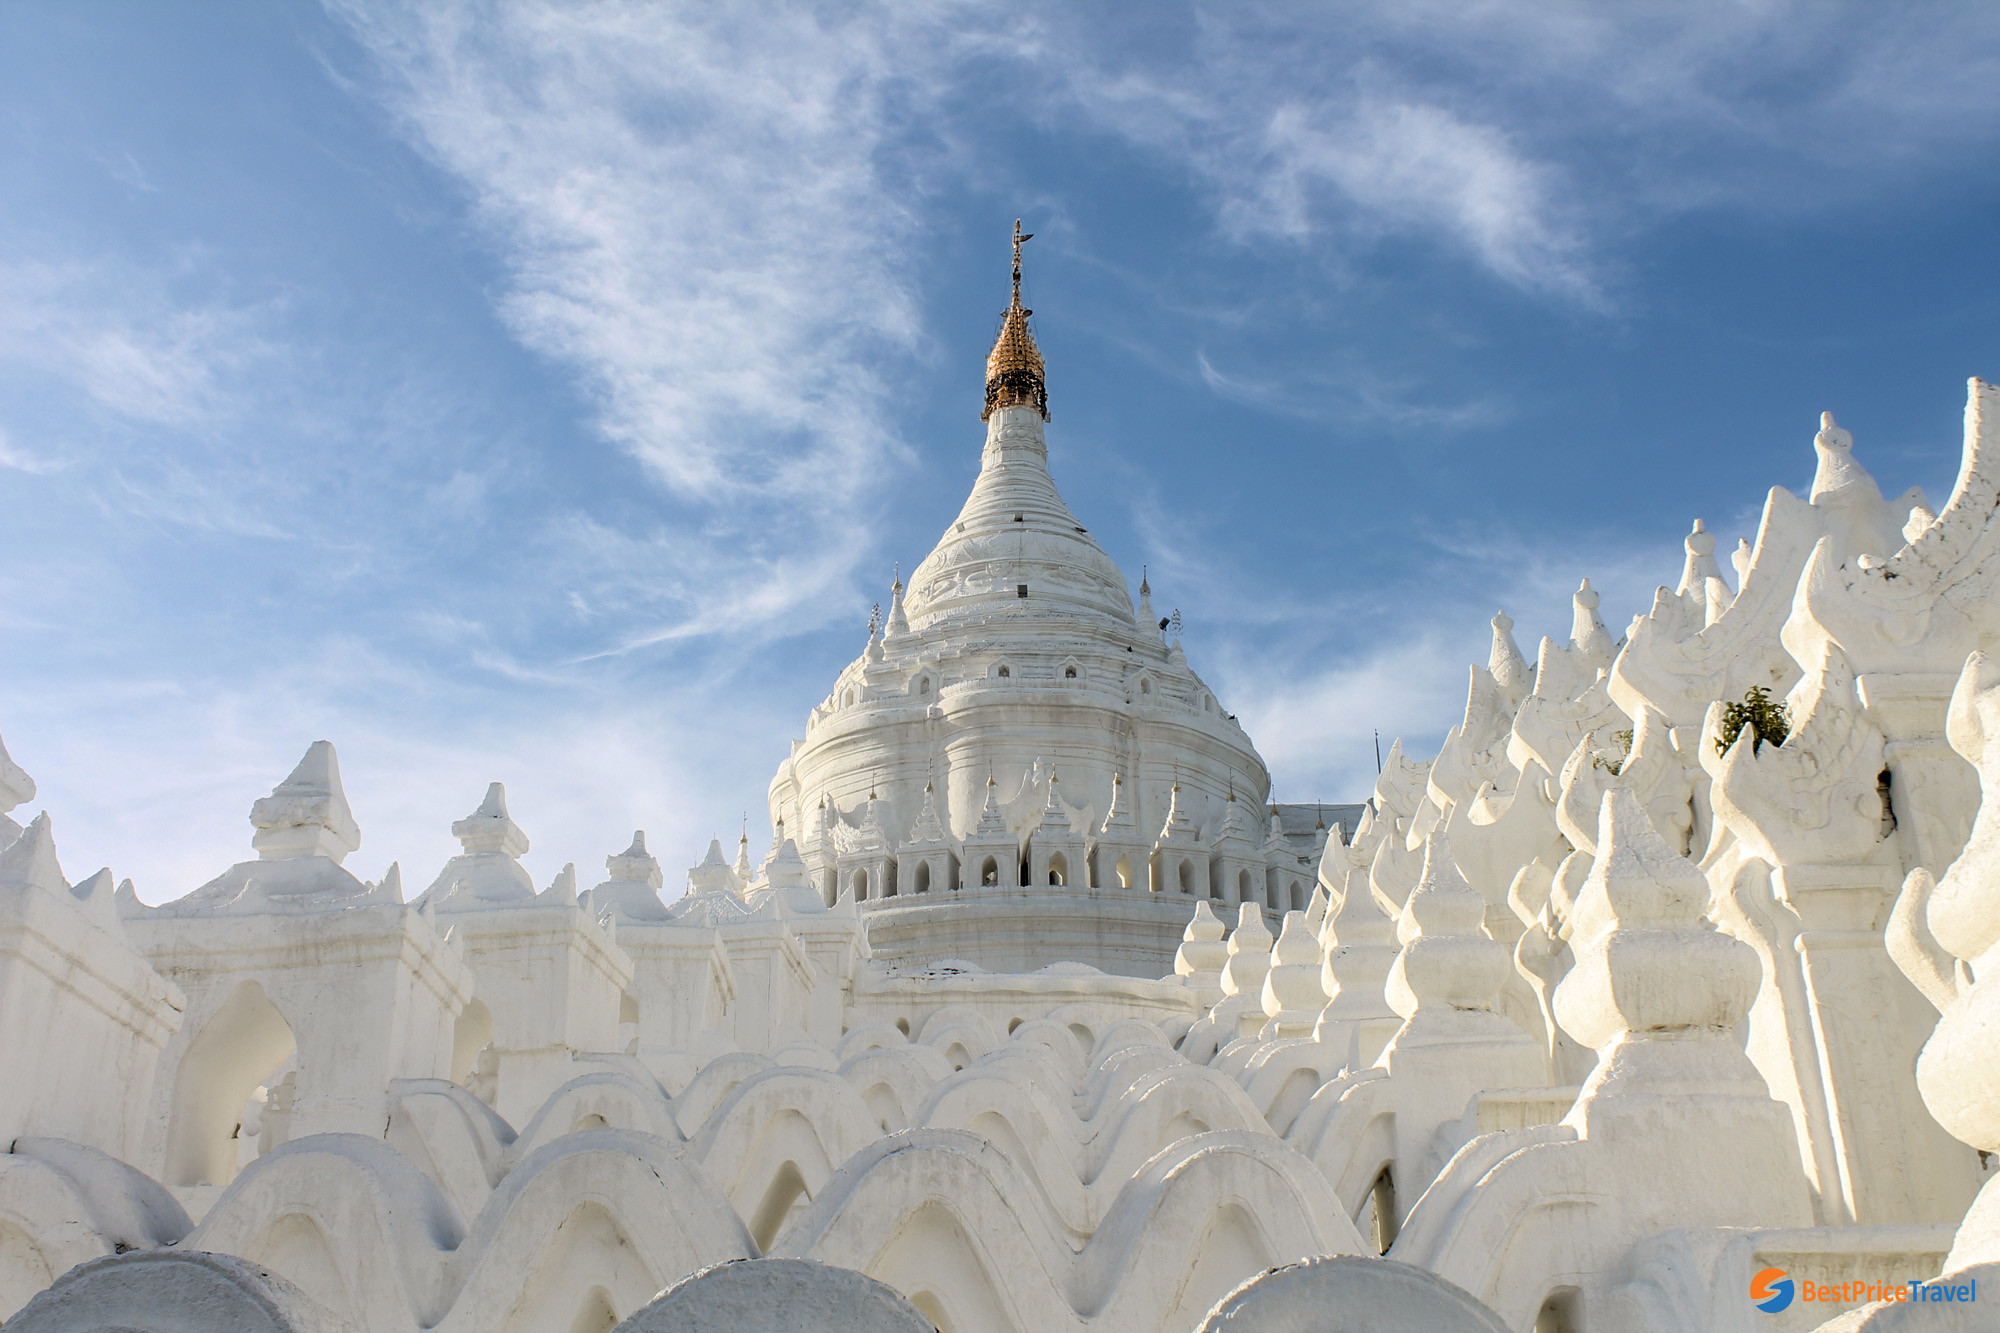 The architecture of Hsinbyume Pagoda